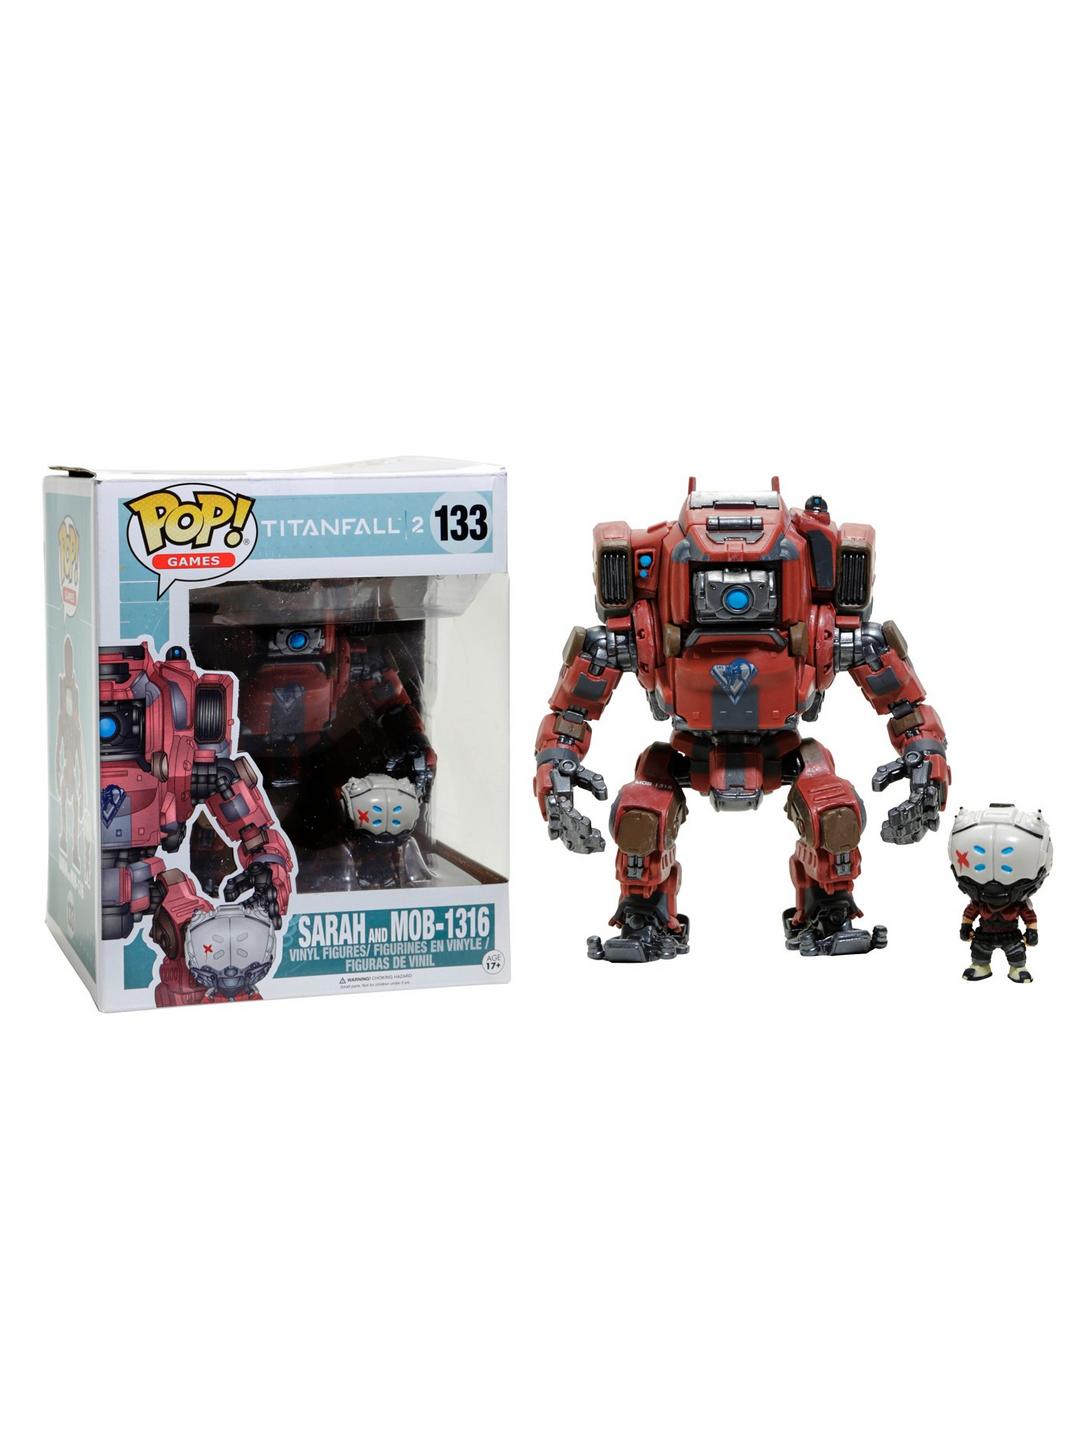 Funko Pop Titanfall 2 Collection Functional Control Compartment for Sarah Bring The Action Game into Reality with These Figurines Includes Sarah and Mob 1316 Detailed Design 11622 Accessory Toys & Games Miscellaneous